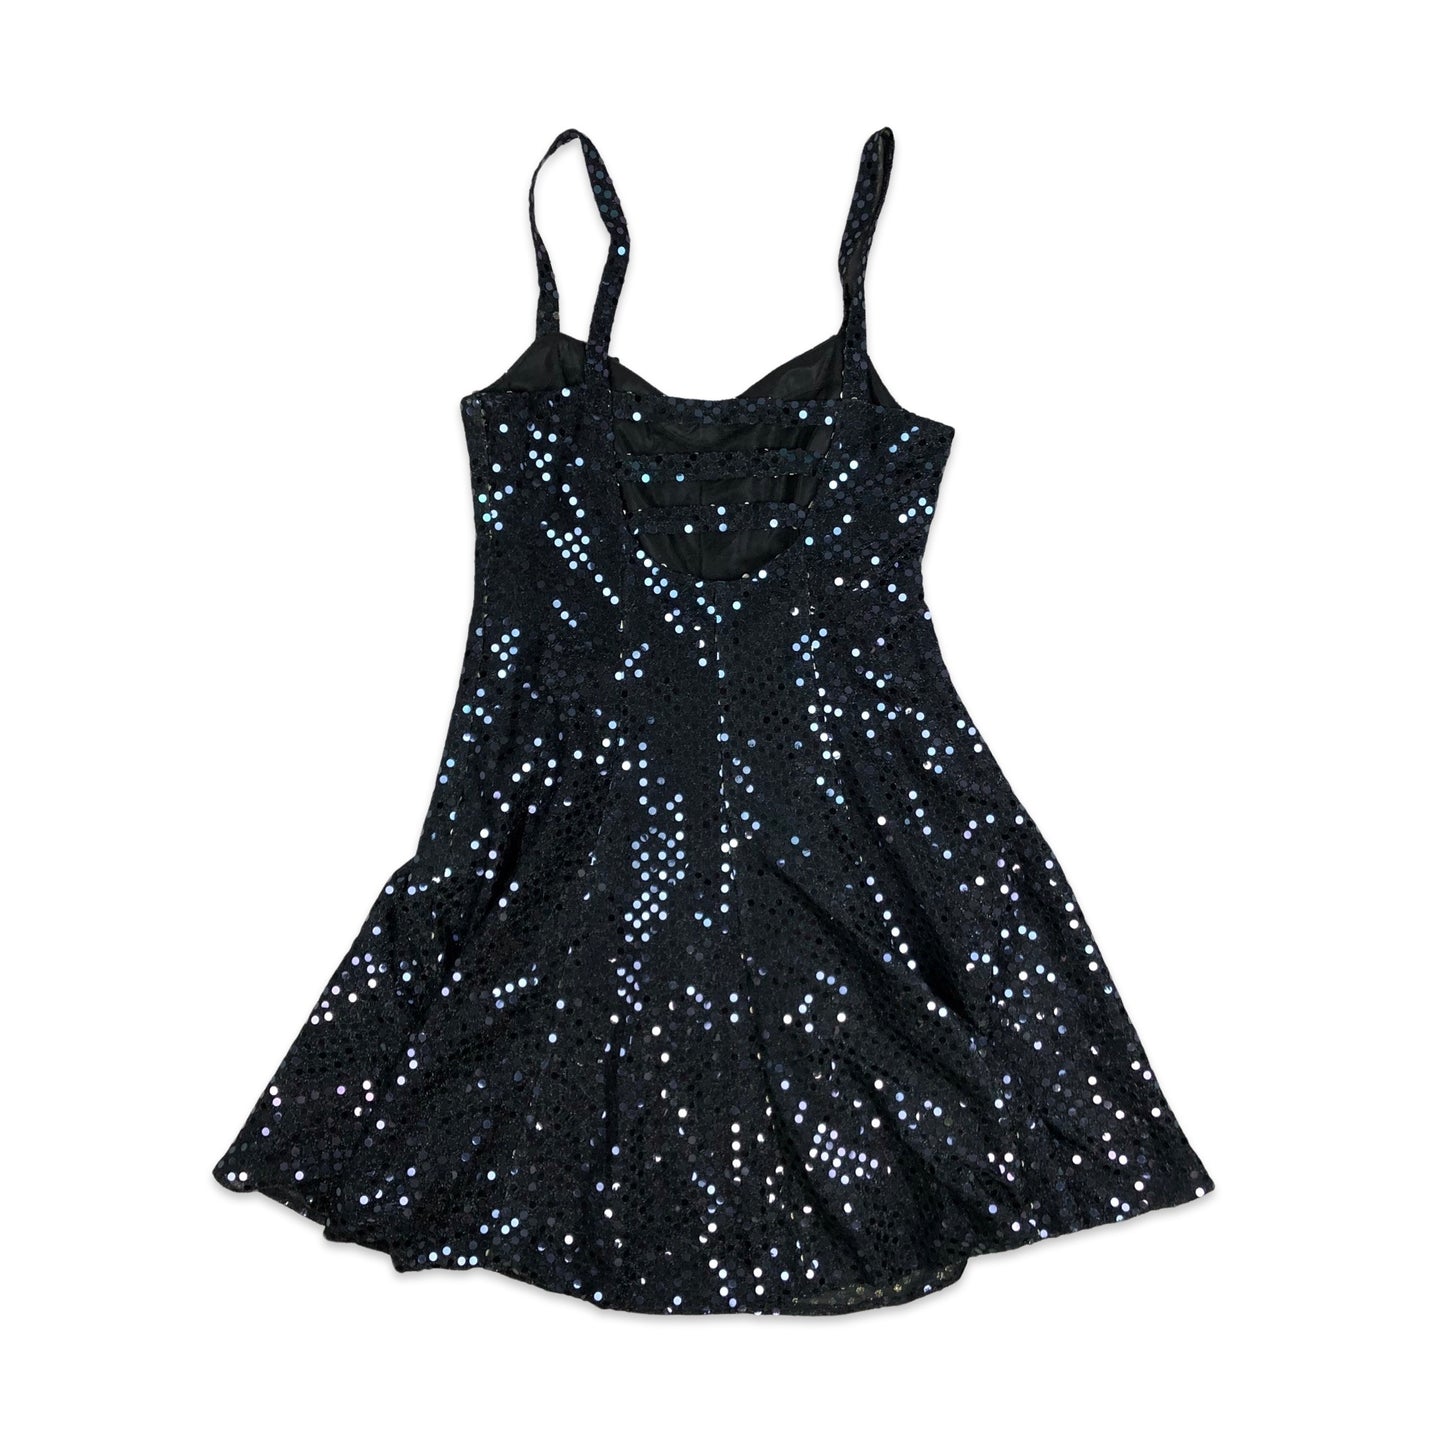 Vintage 80s 90s Black Sequinned Strappy Party Dress 8